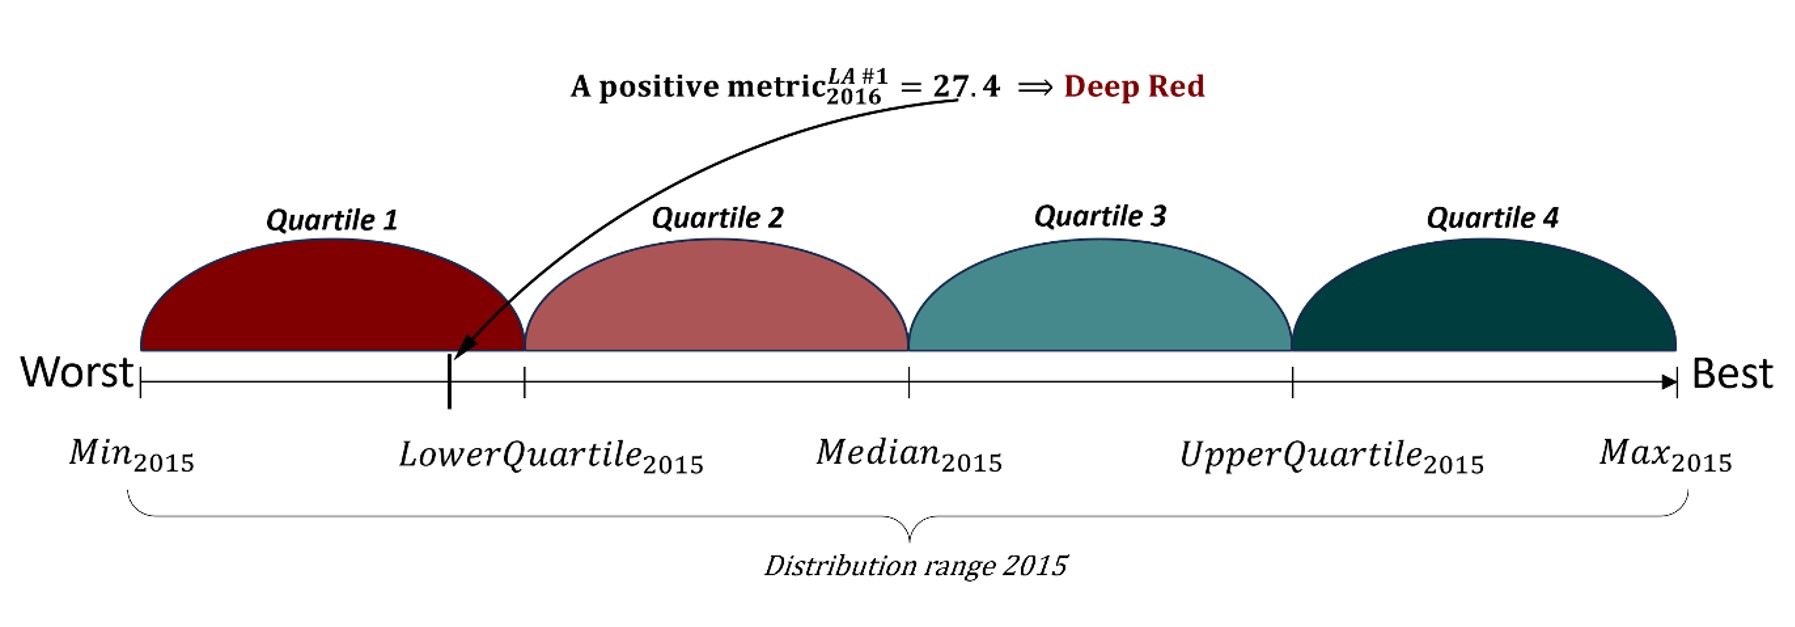 2015 distribution split in four quartiles by its minimum, lower and upper quartiles, median and maximum values. Quartiles 1 and 2 which are below Median2015 (that is ‘The Level’ in levelling up terms) have been highlighted in shades of red, and Quartiles 3 and 4 which are above the Median2015 have been highlighted in shades of green.